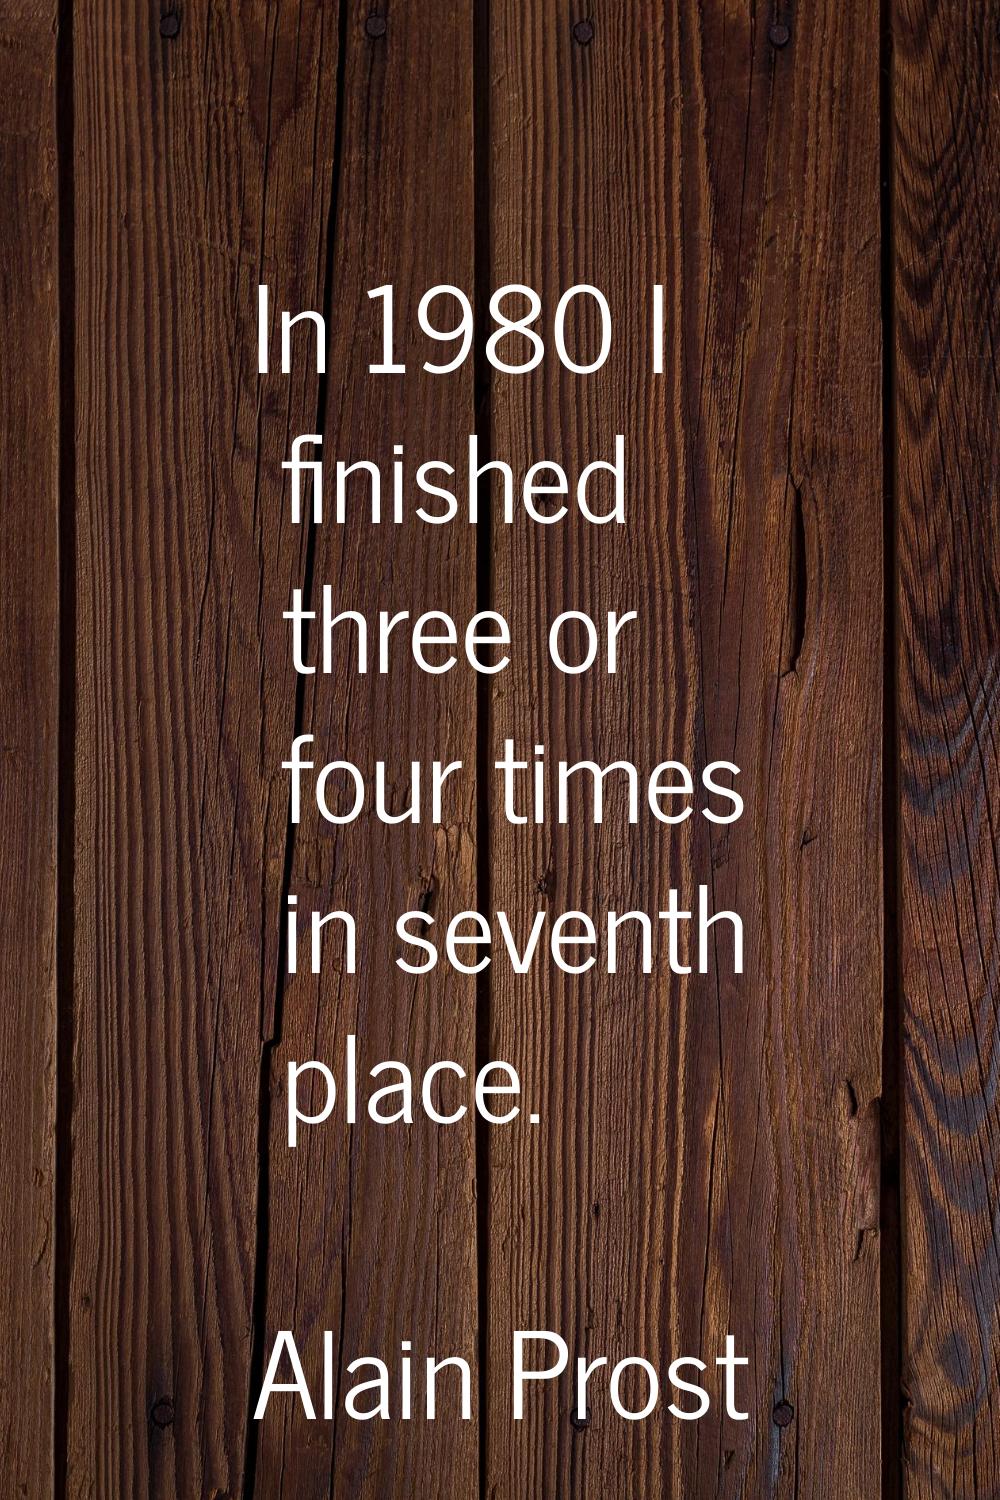 In 1980 I finished three or four times in seventh place.